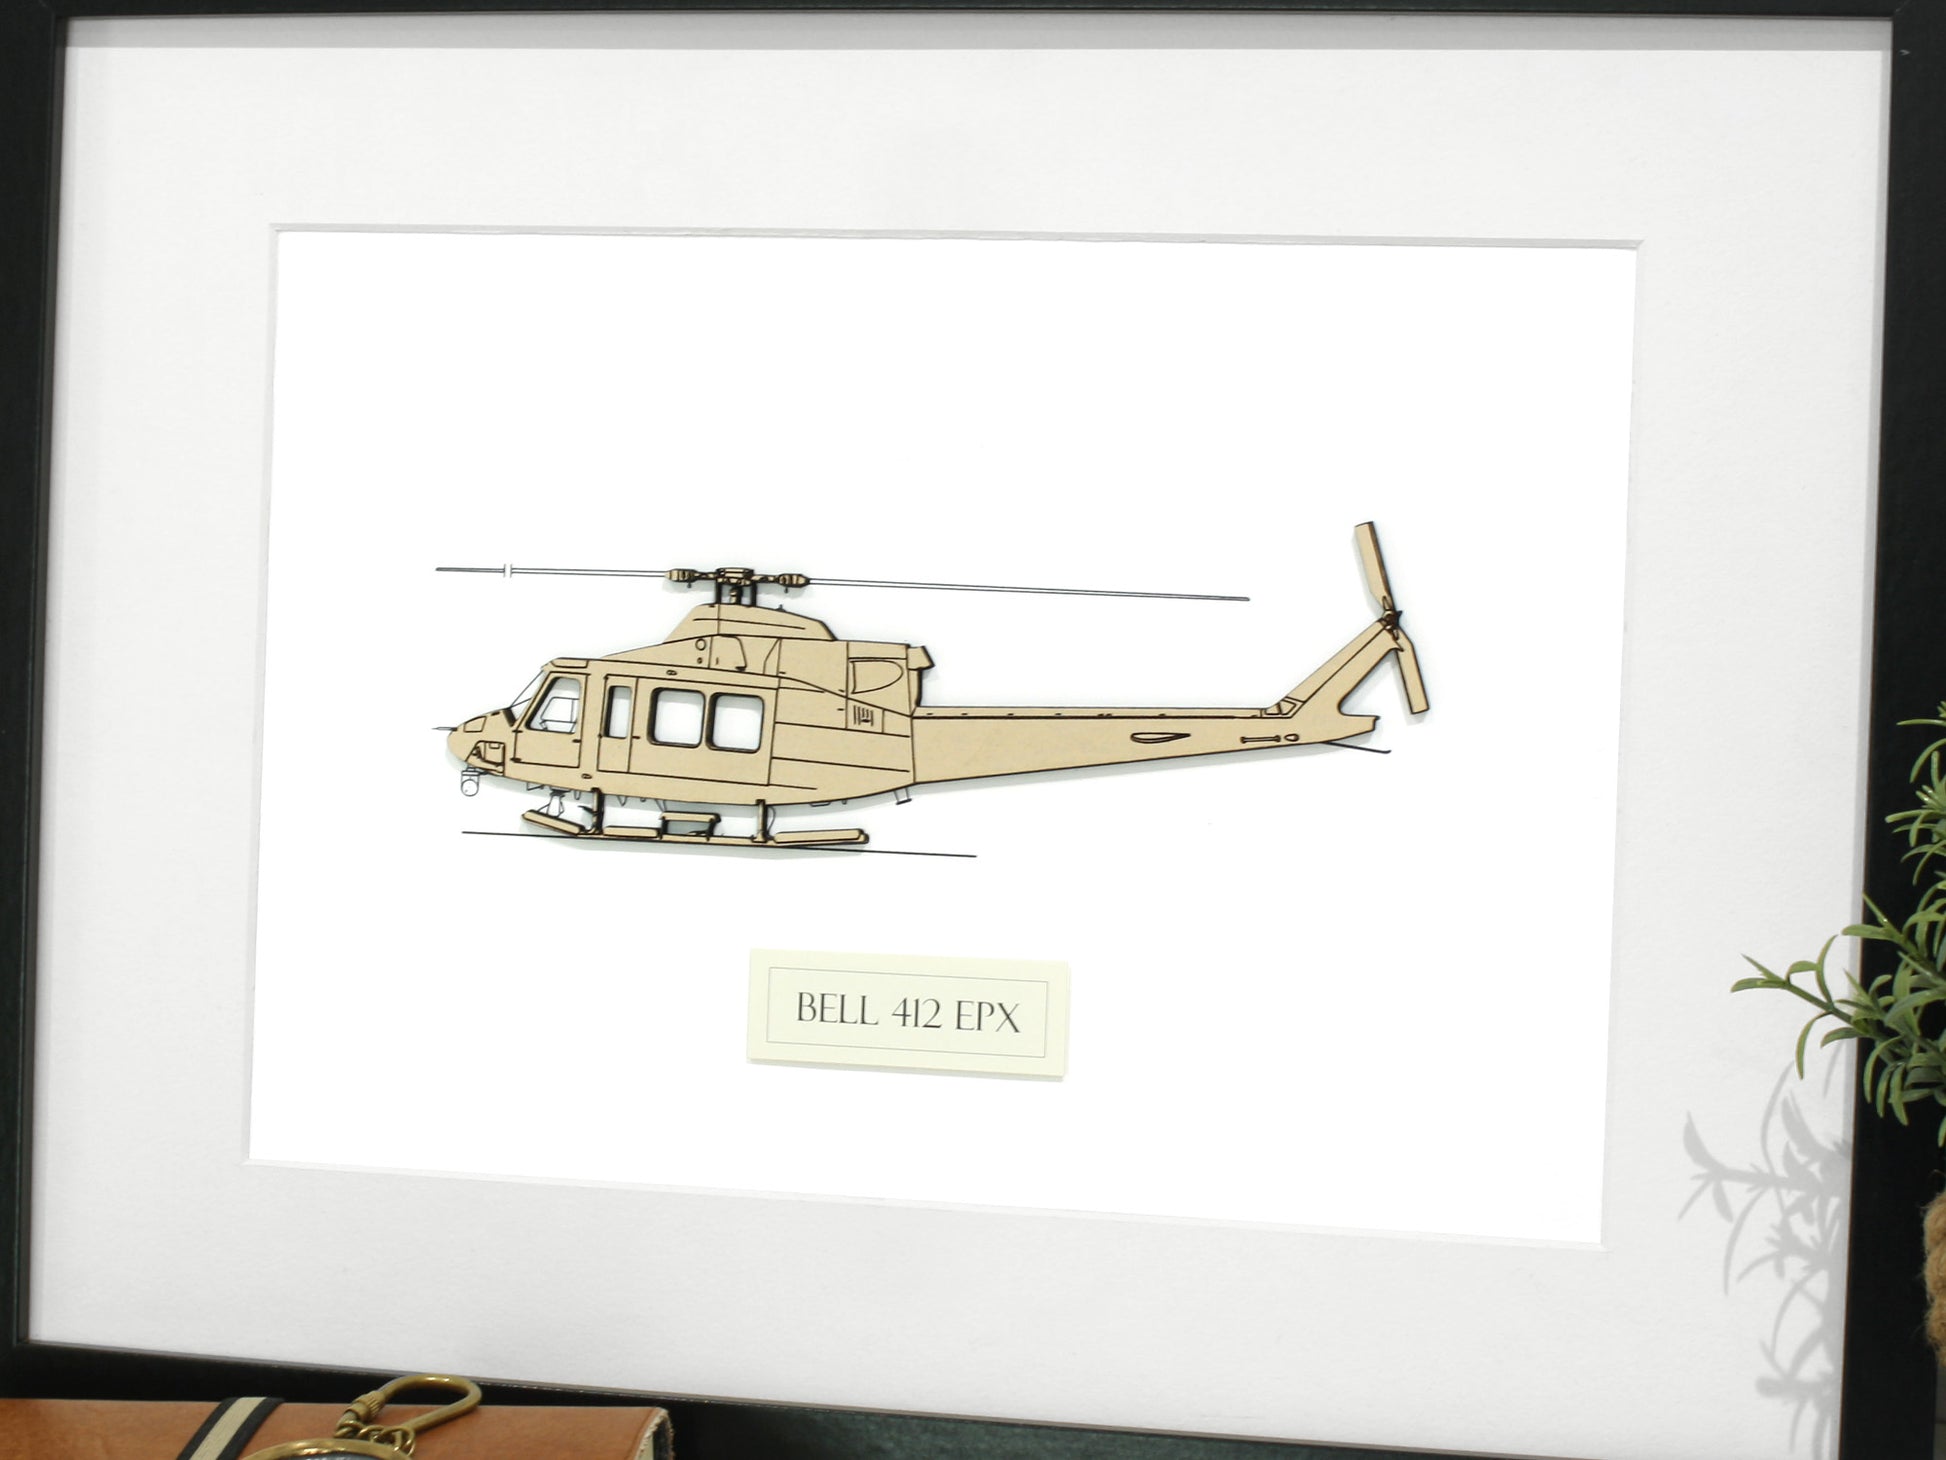 Bell 412 EPX helicopter gifts